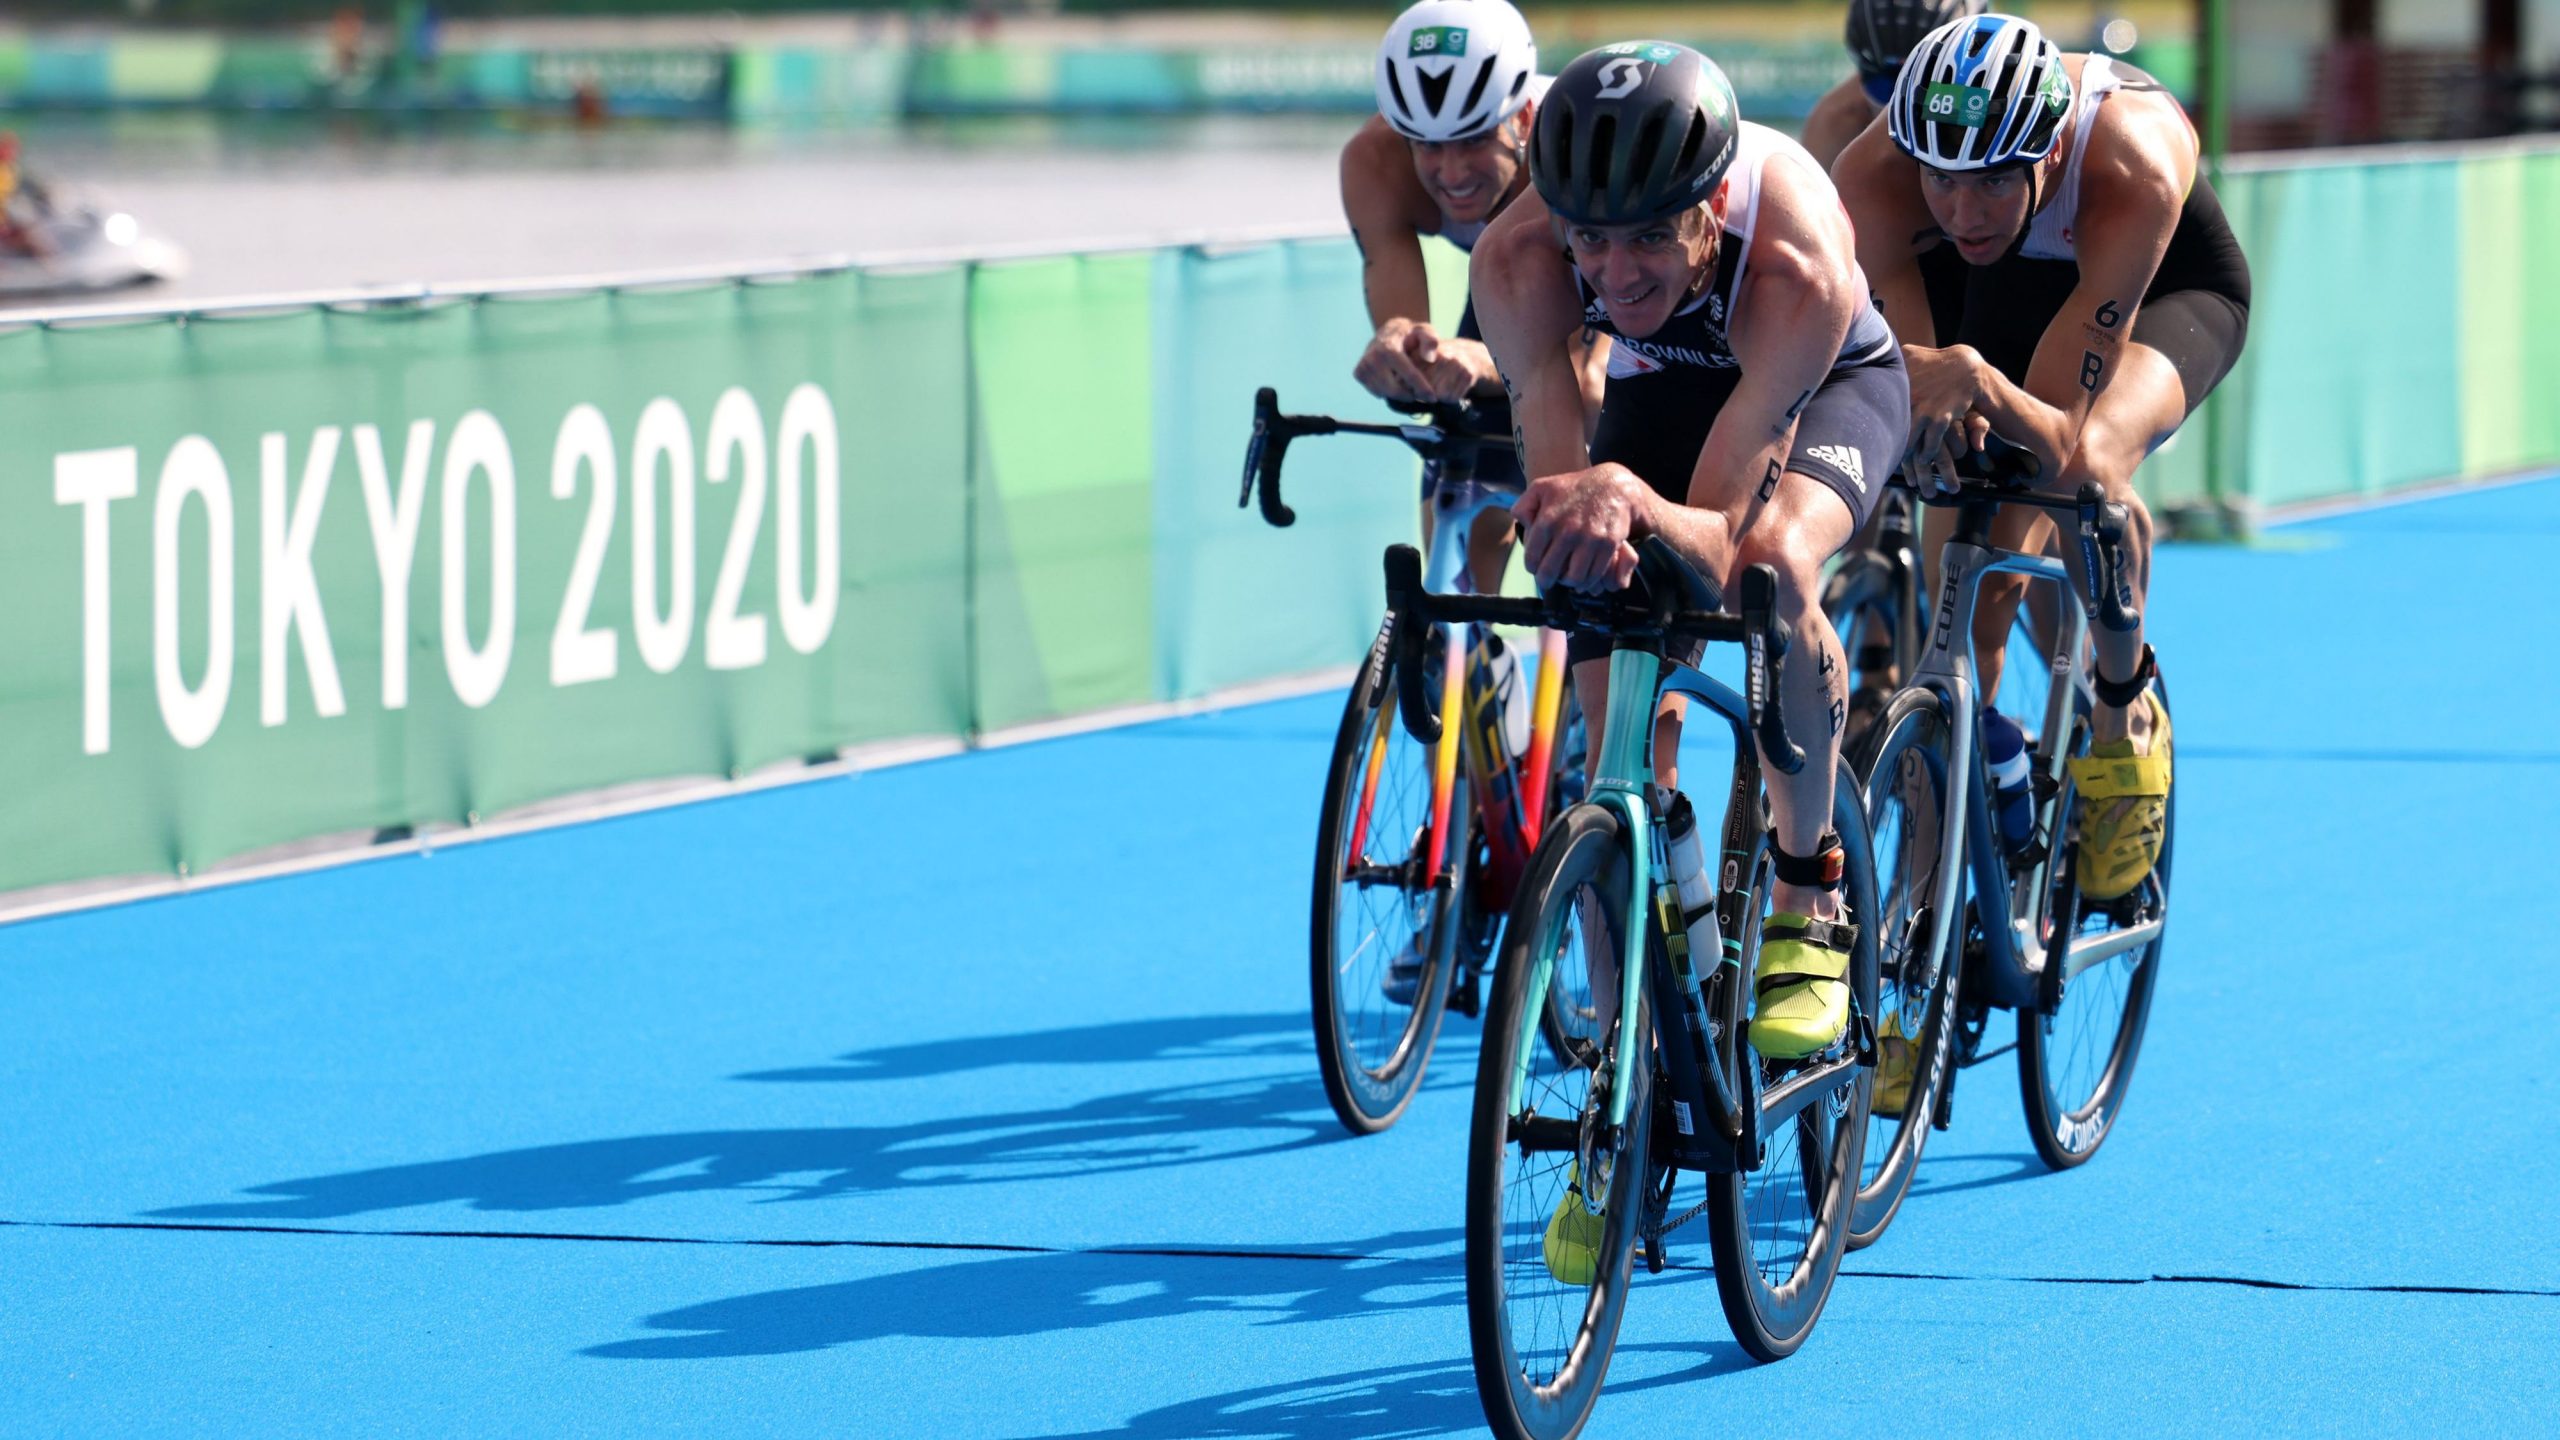 Triathlon: Great Britain wins gold in German mixed quartet in sixth place